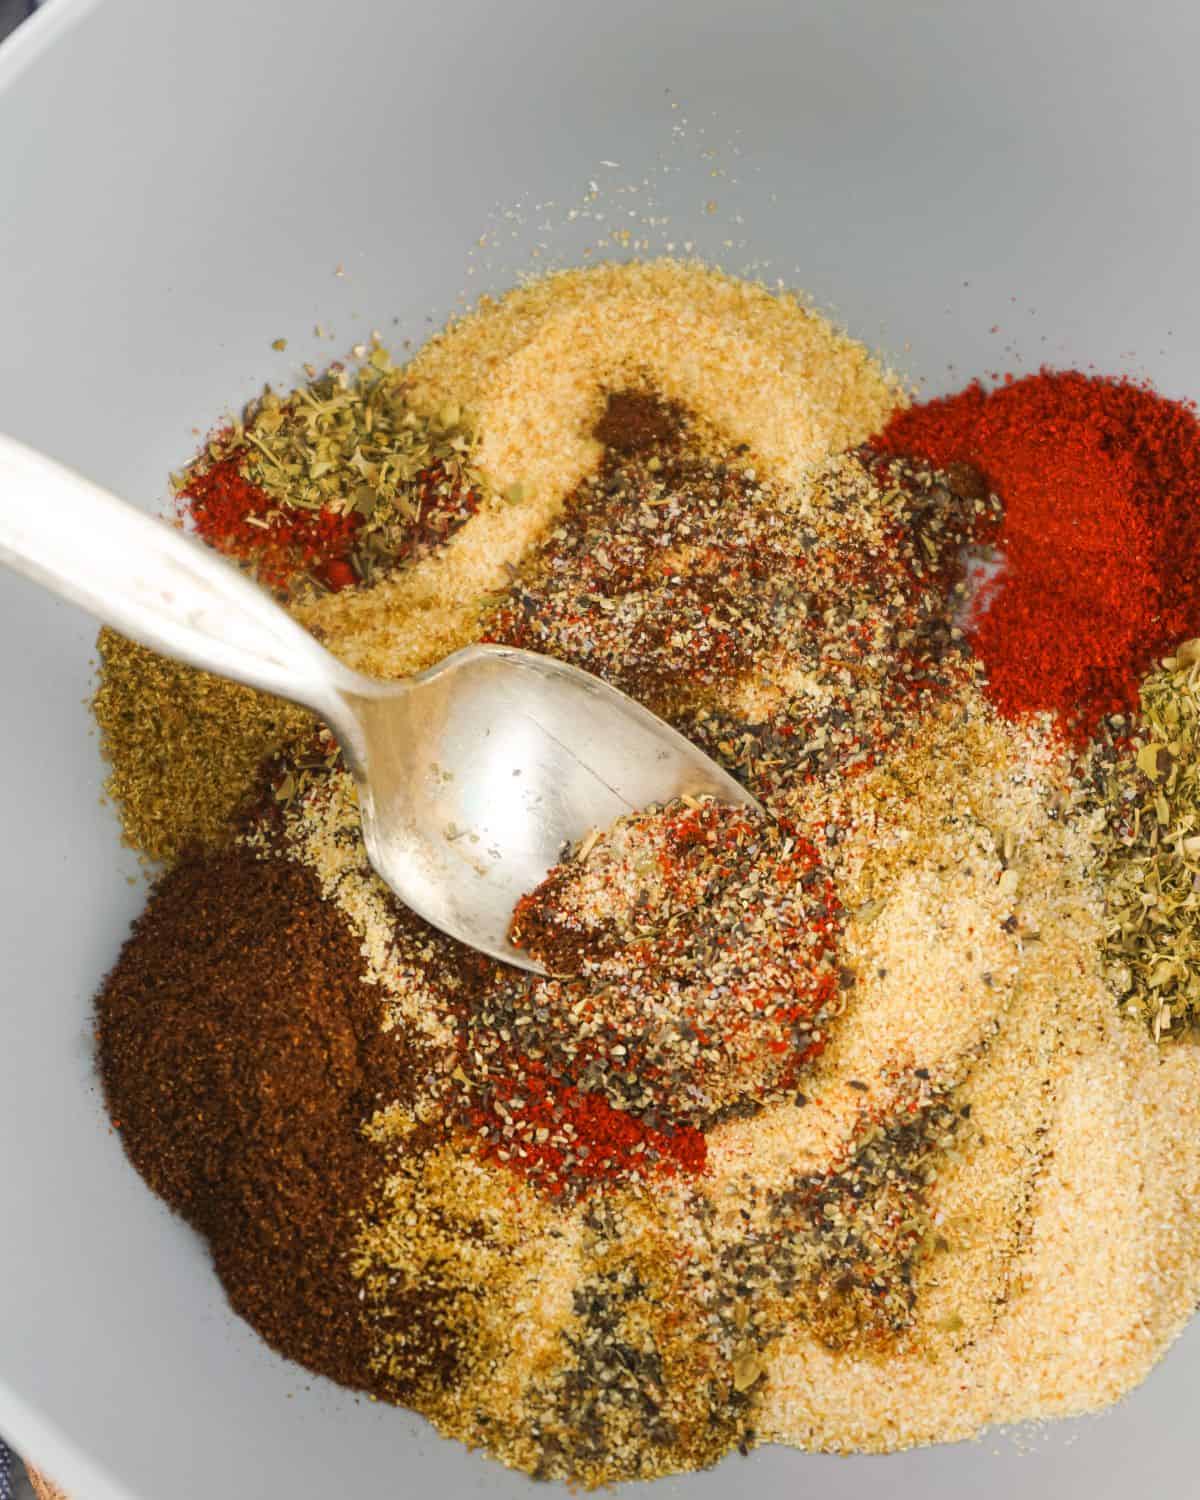 Spices being mixed together in a bowl with a spoon.